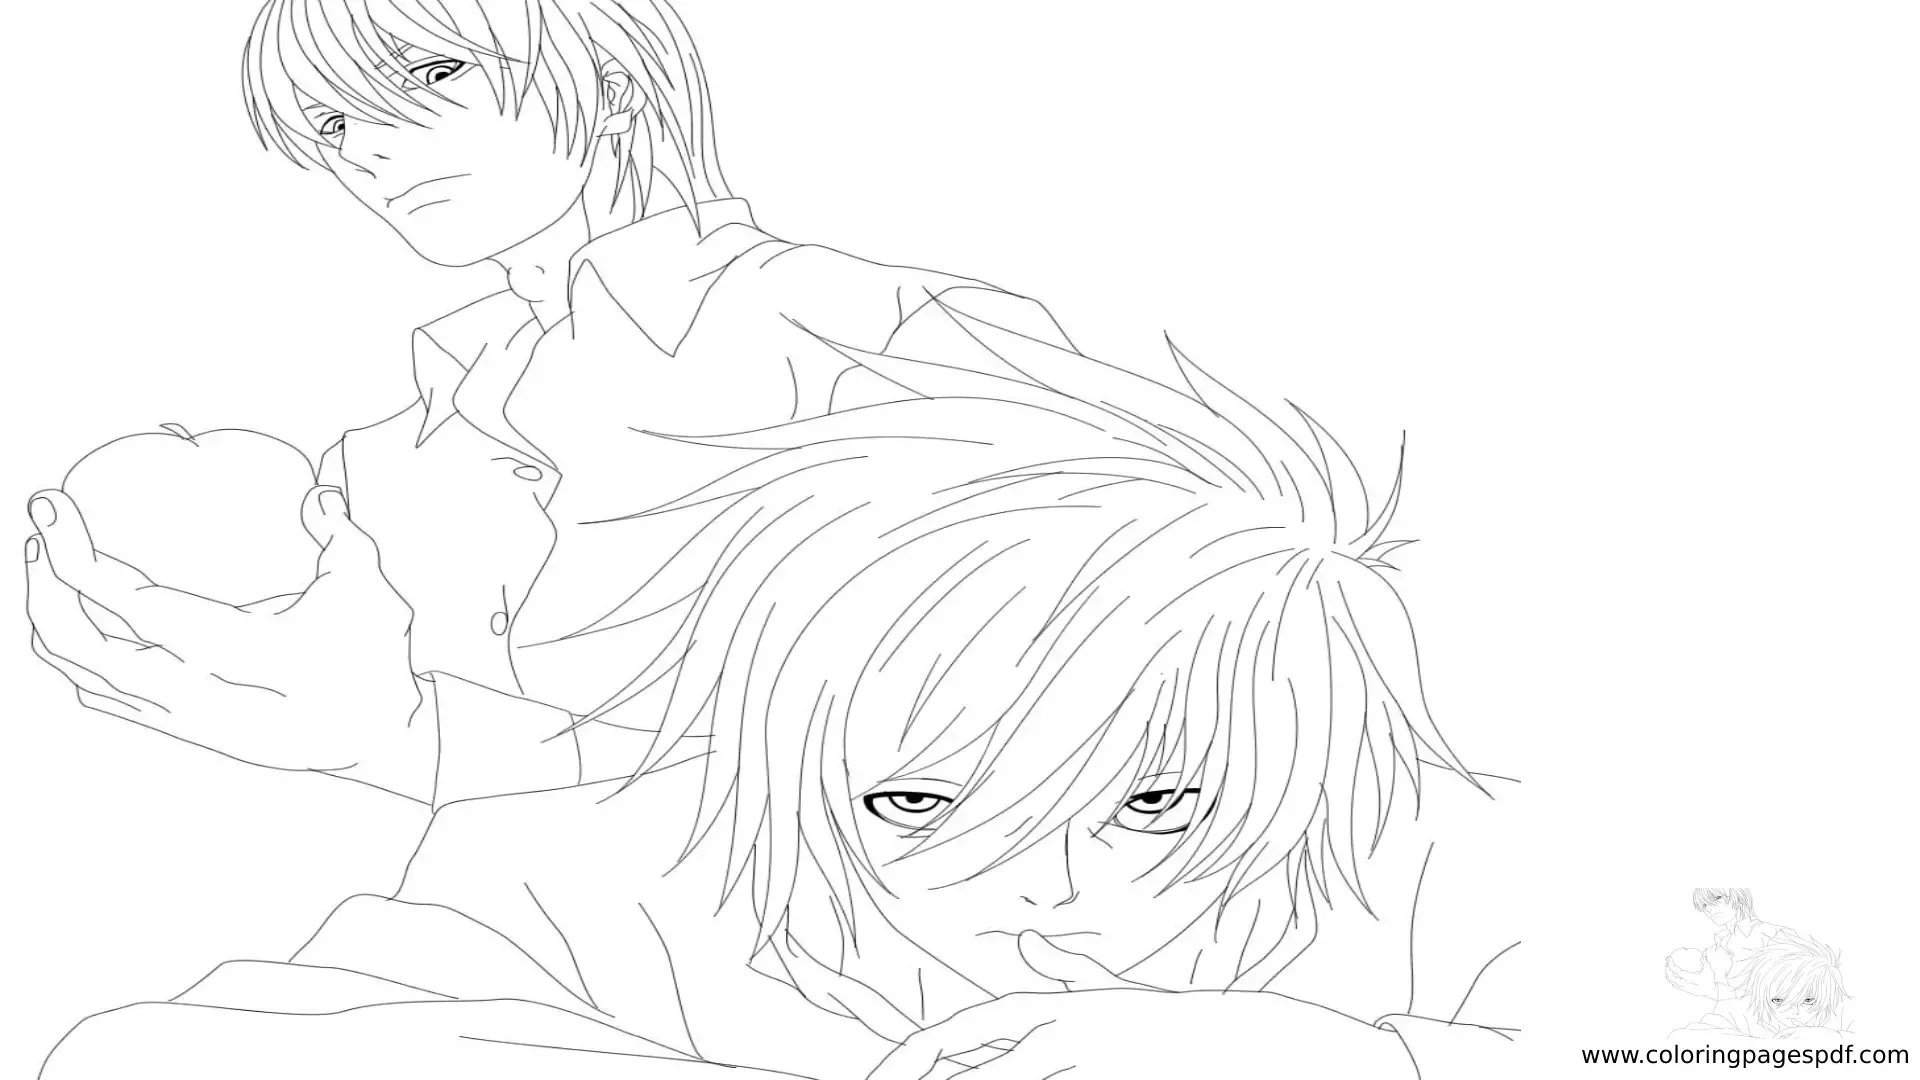 Coloring Page Of L And Light (Death Note)